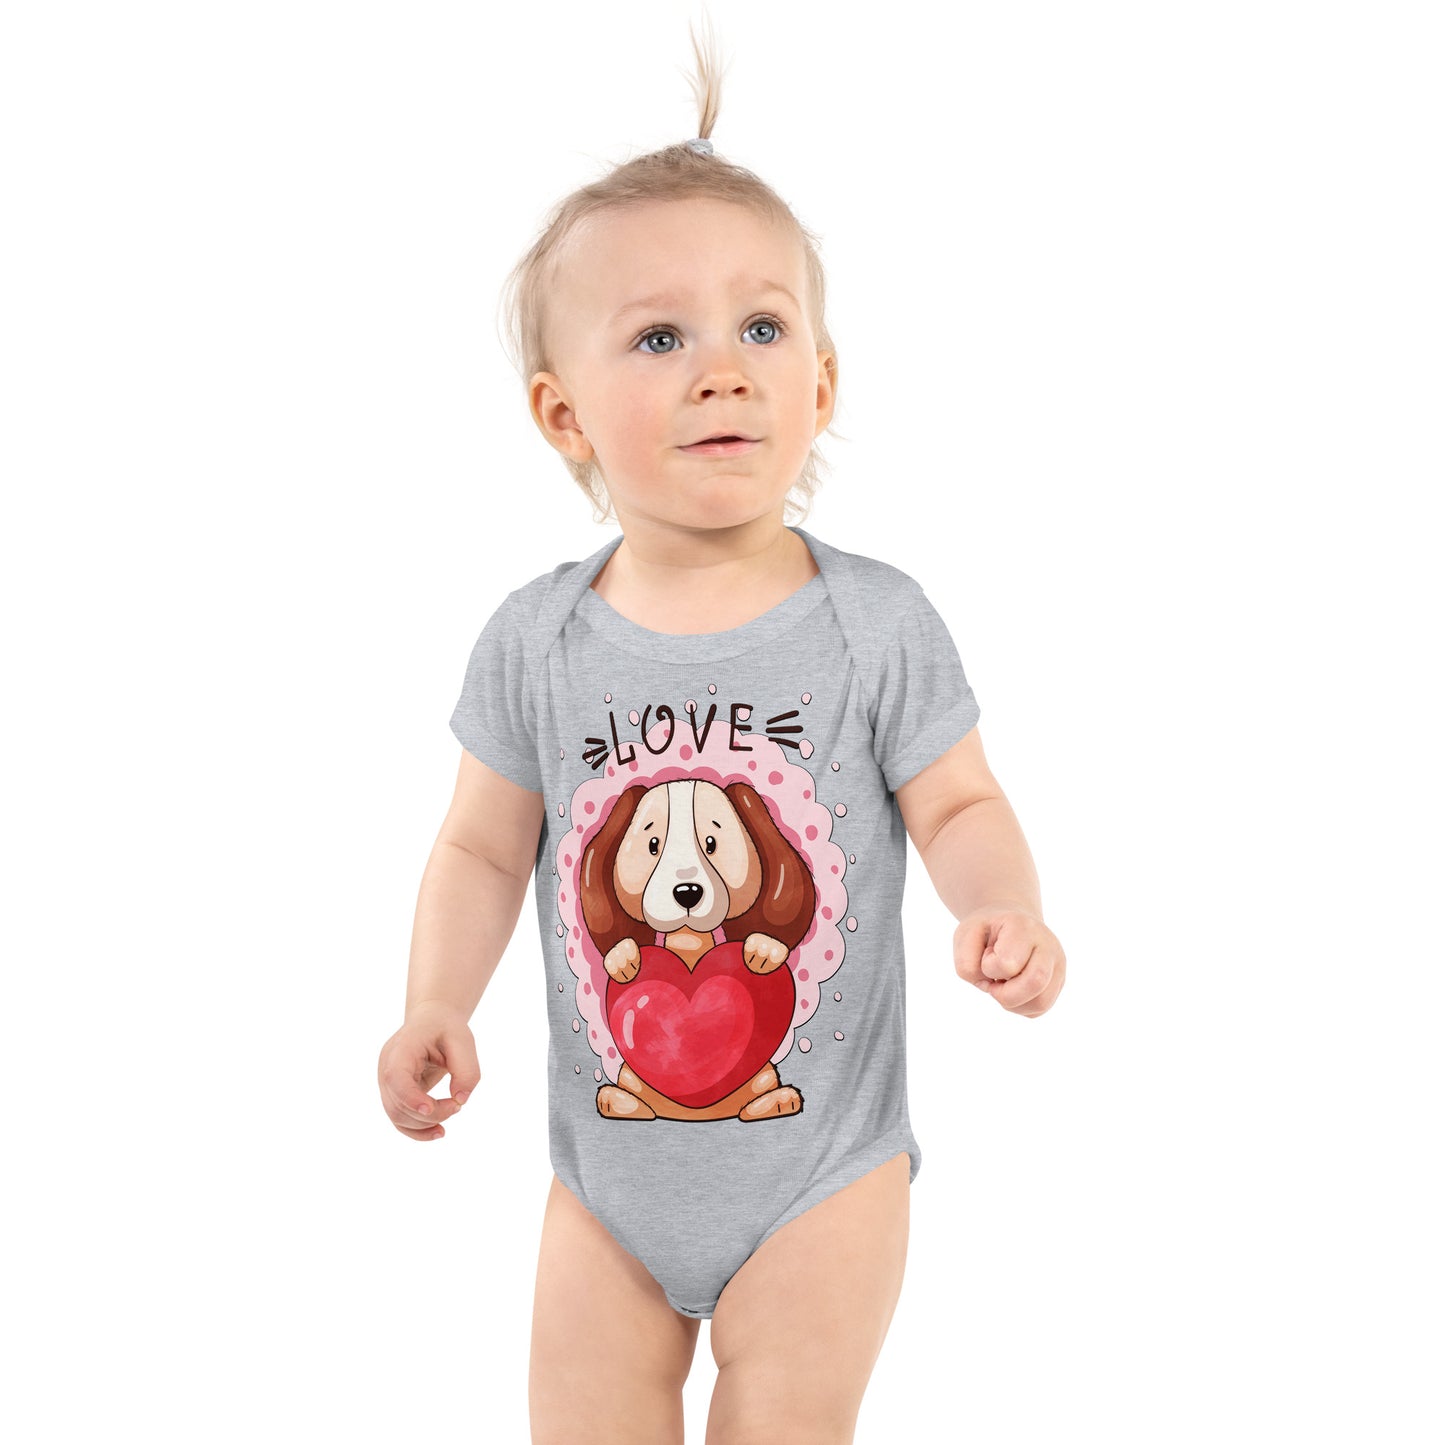 Lovely Puppy Dog with Heart Bodysuit, No. 0482